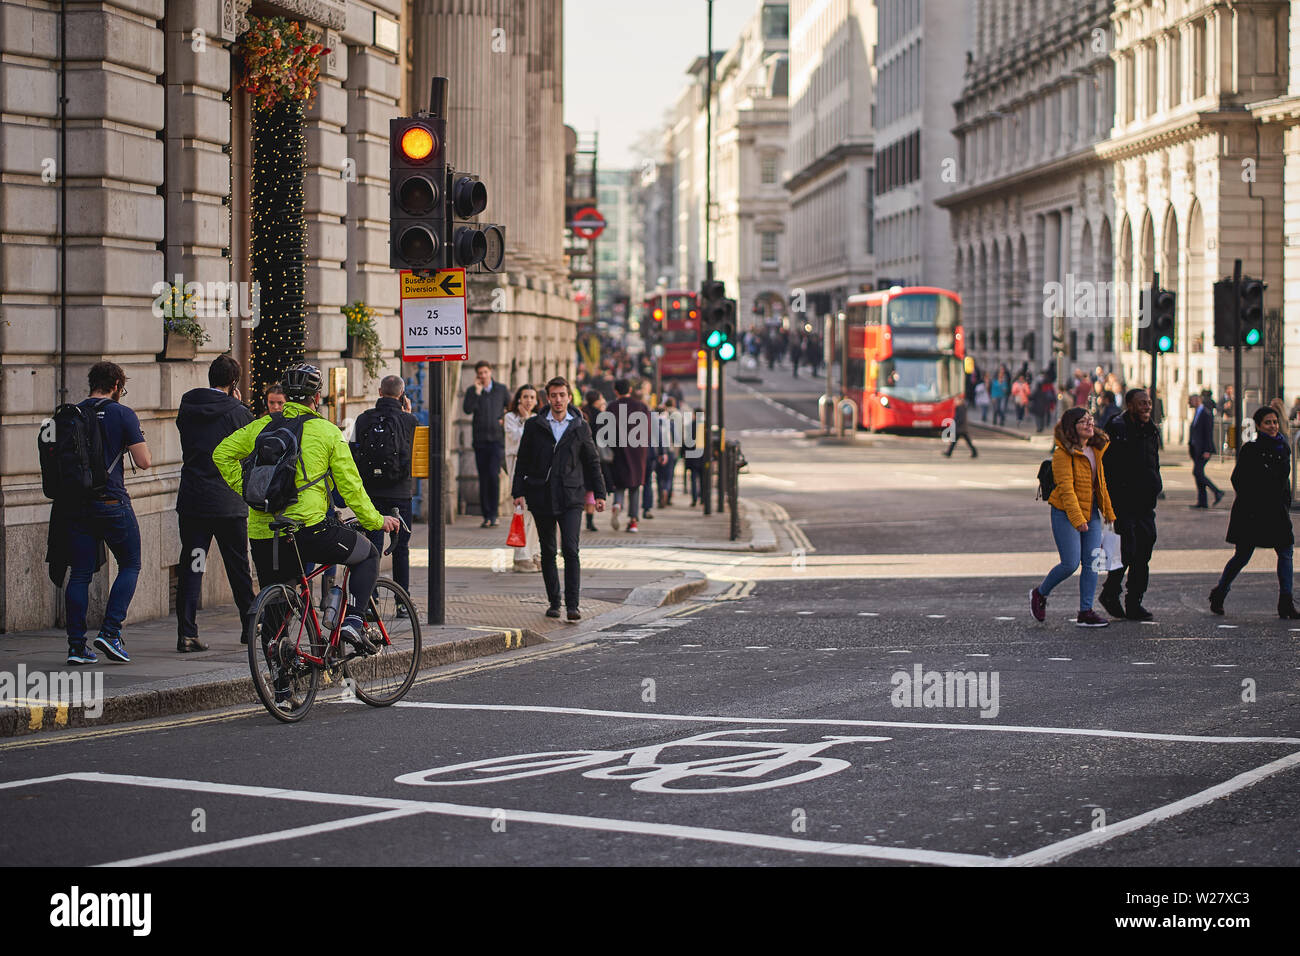 London, UK - February, 2019. A cycling commuter at a crossing in Bank, central London. Stock Photo